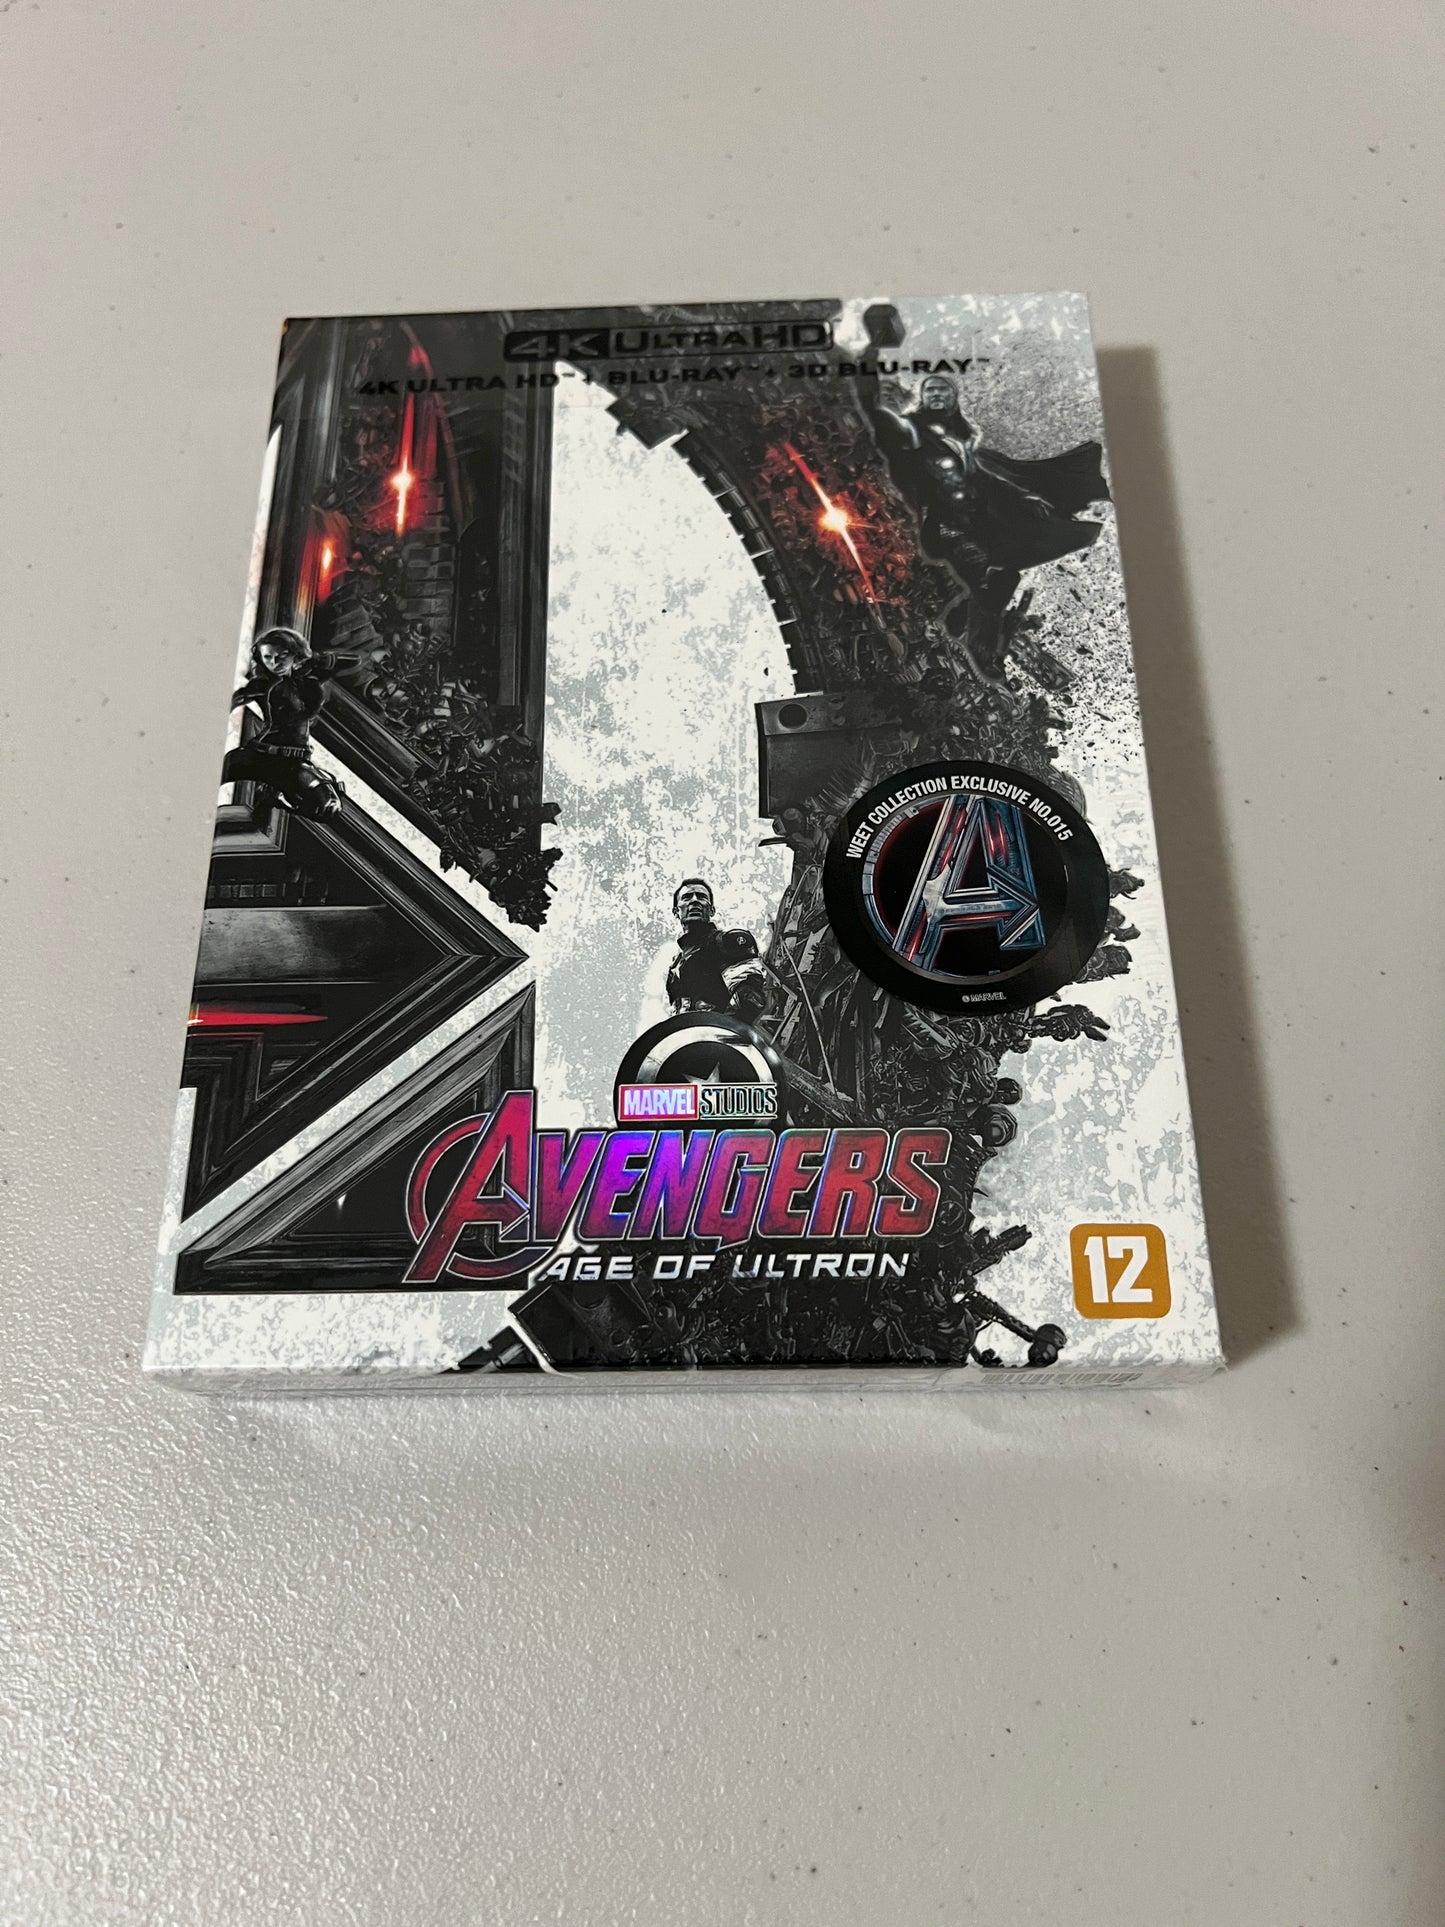 Avengers: Age of Ultron (4K+2D Blu-ray SteelBook) (WeET Collection Exclusive No.15) Full Slip